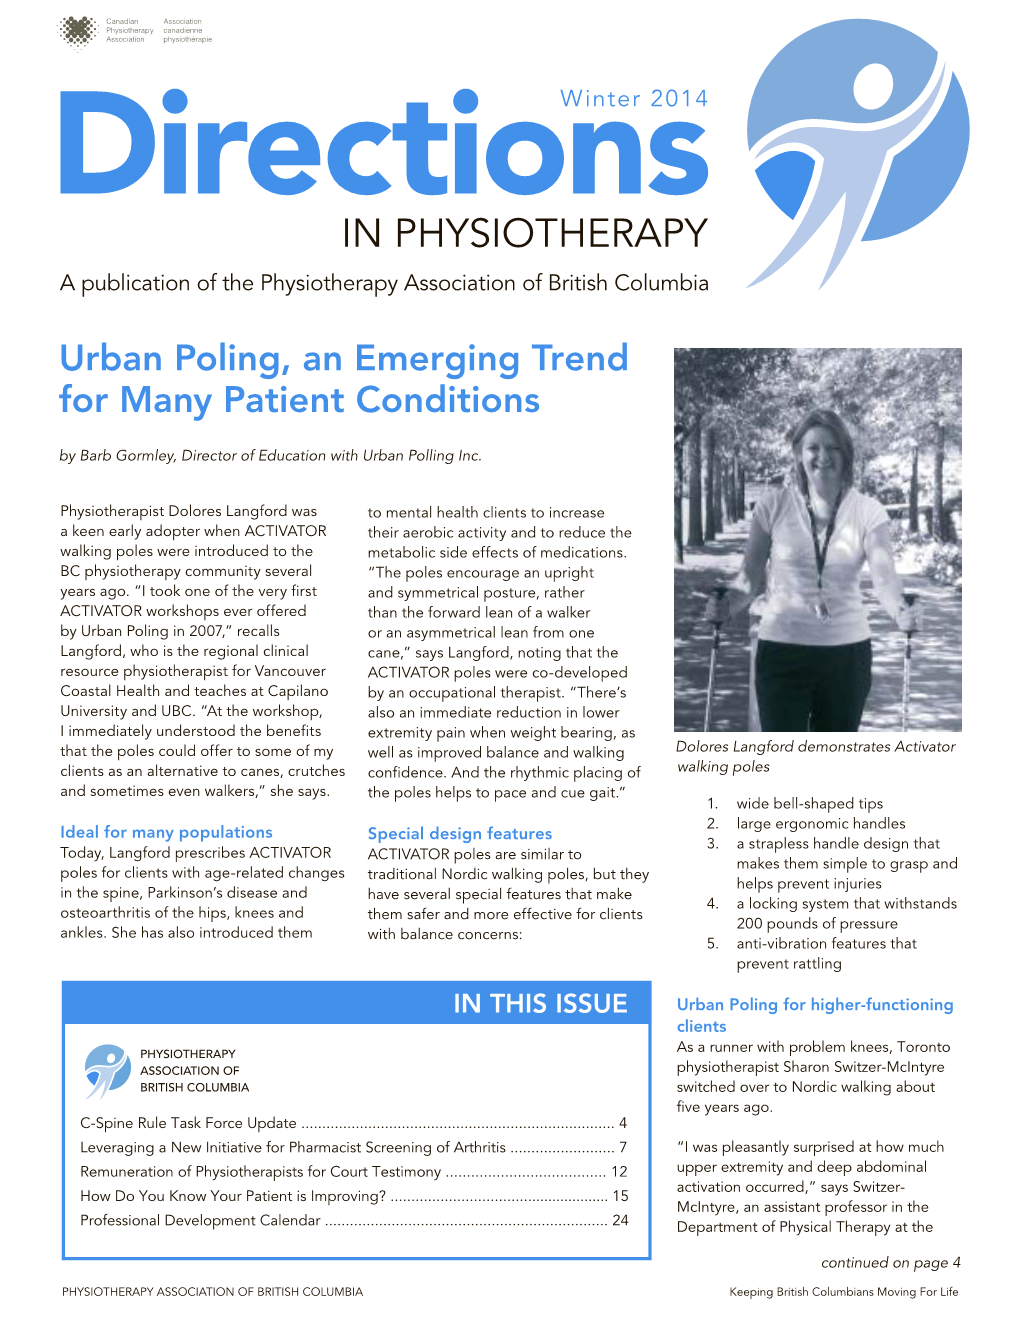 Urban Poling, an Emerging Trend for Many Patient Conditions by Barb Gormley, Director of Education with Urban Polling Inc